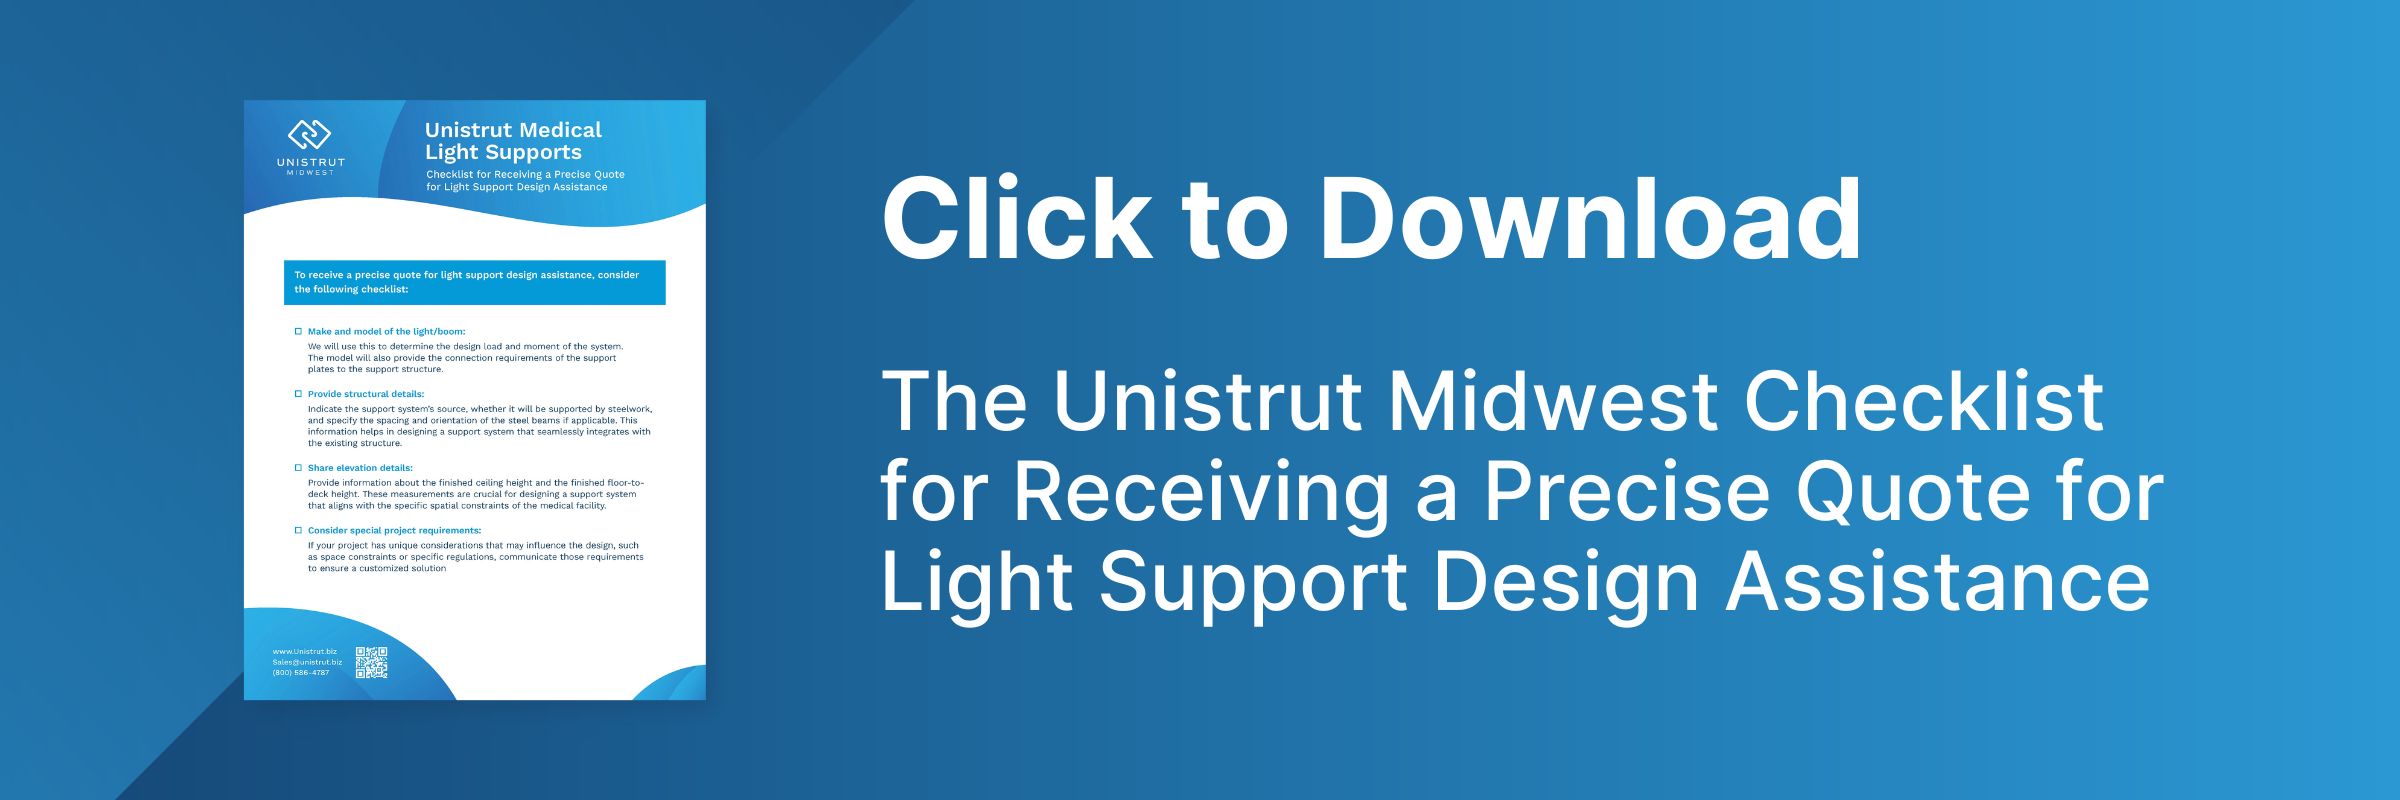 Unistrut Midwest Medical Light Support Quote Checklist